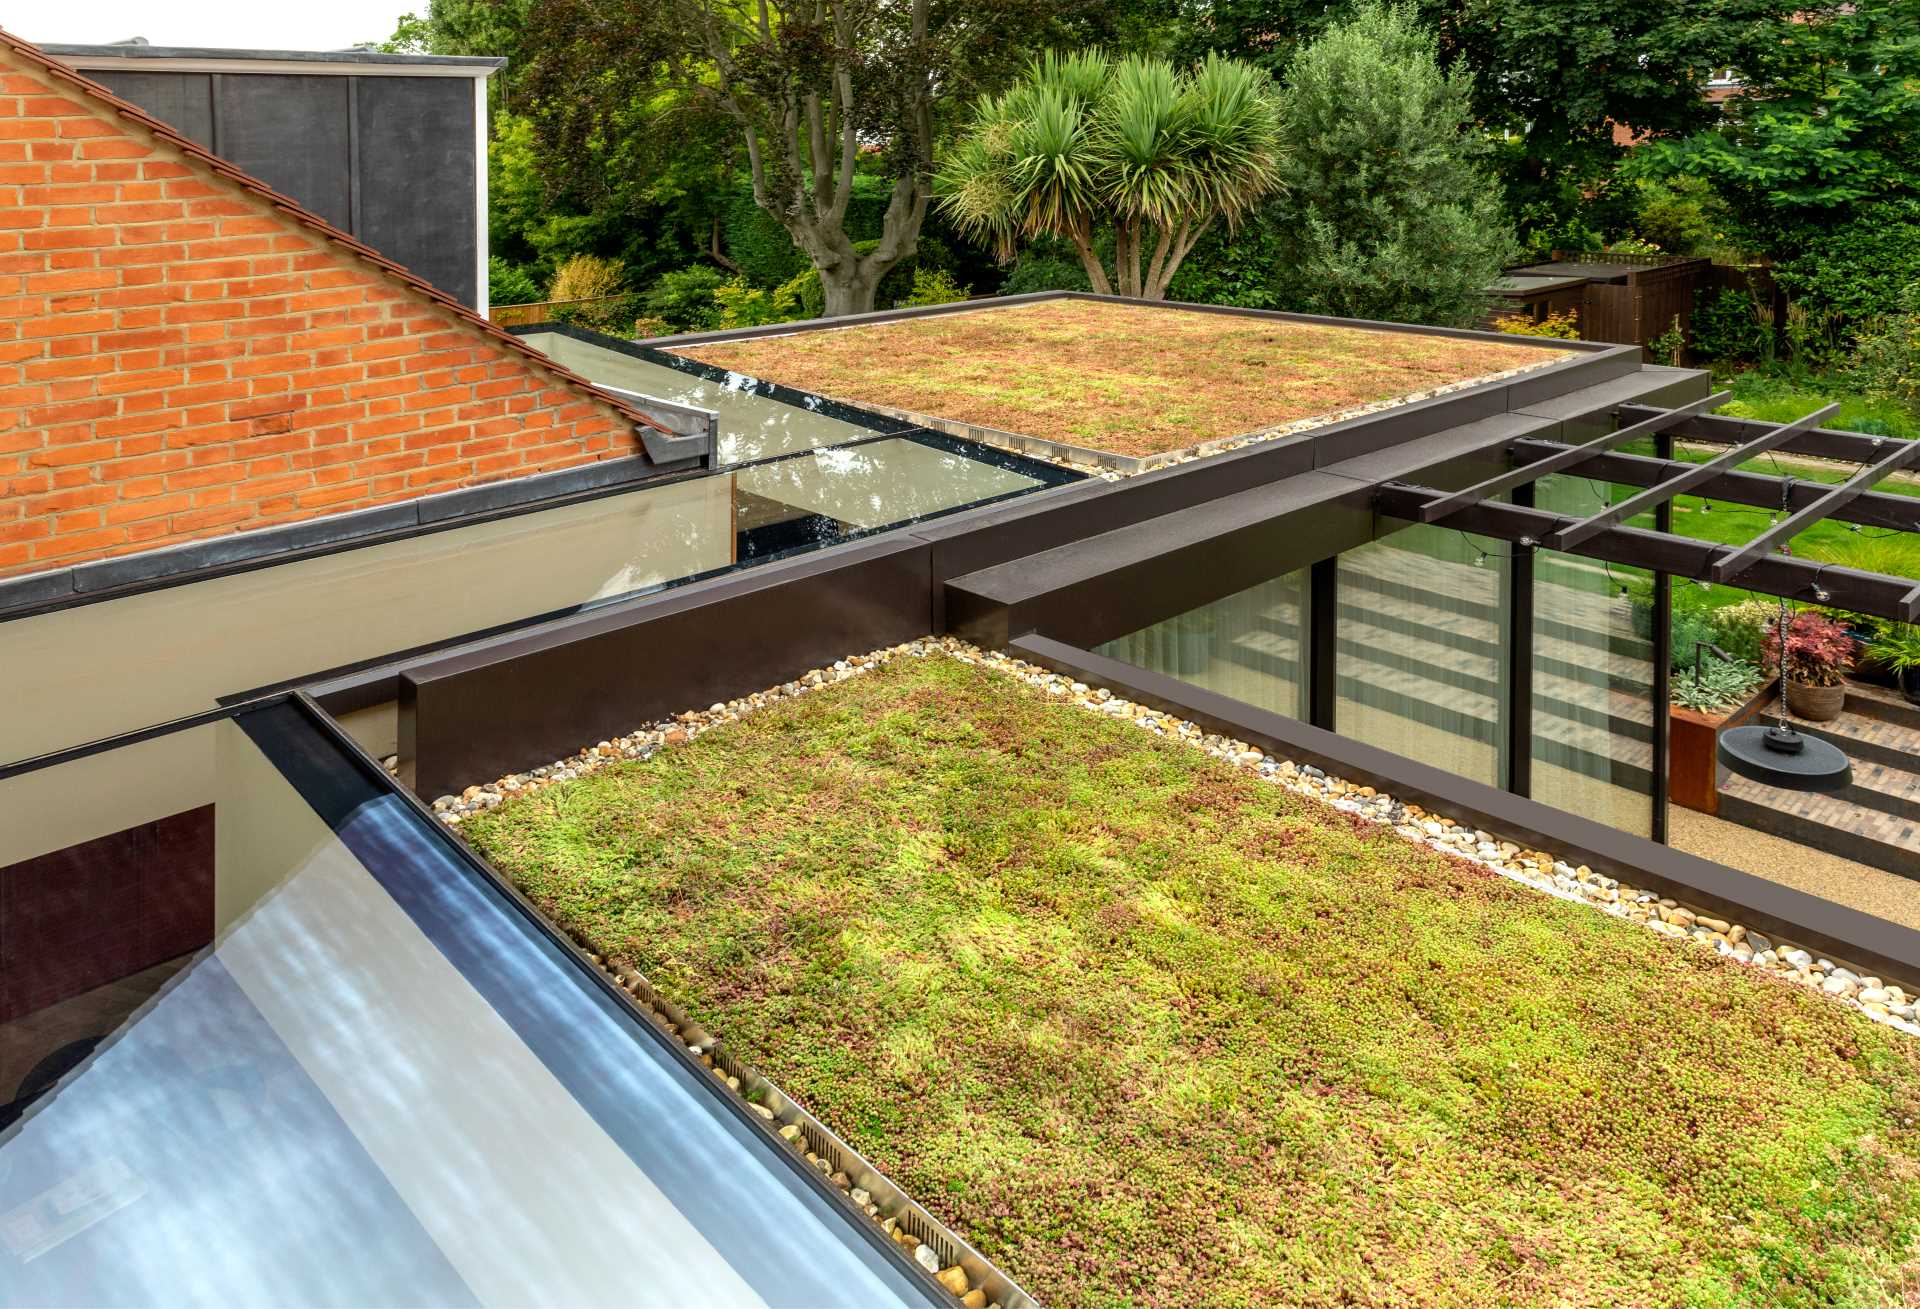 A contemporary extension with a green roof.